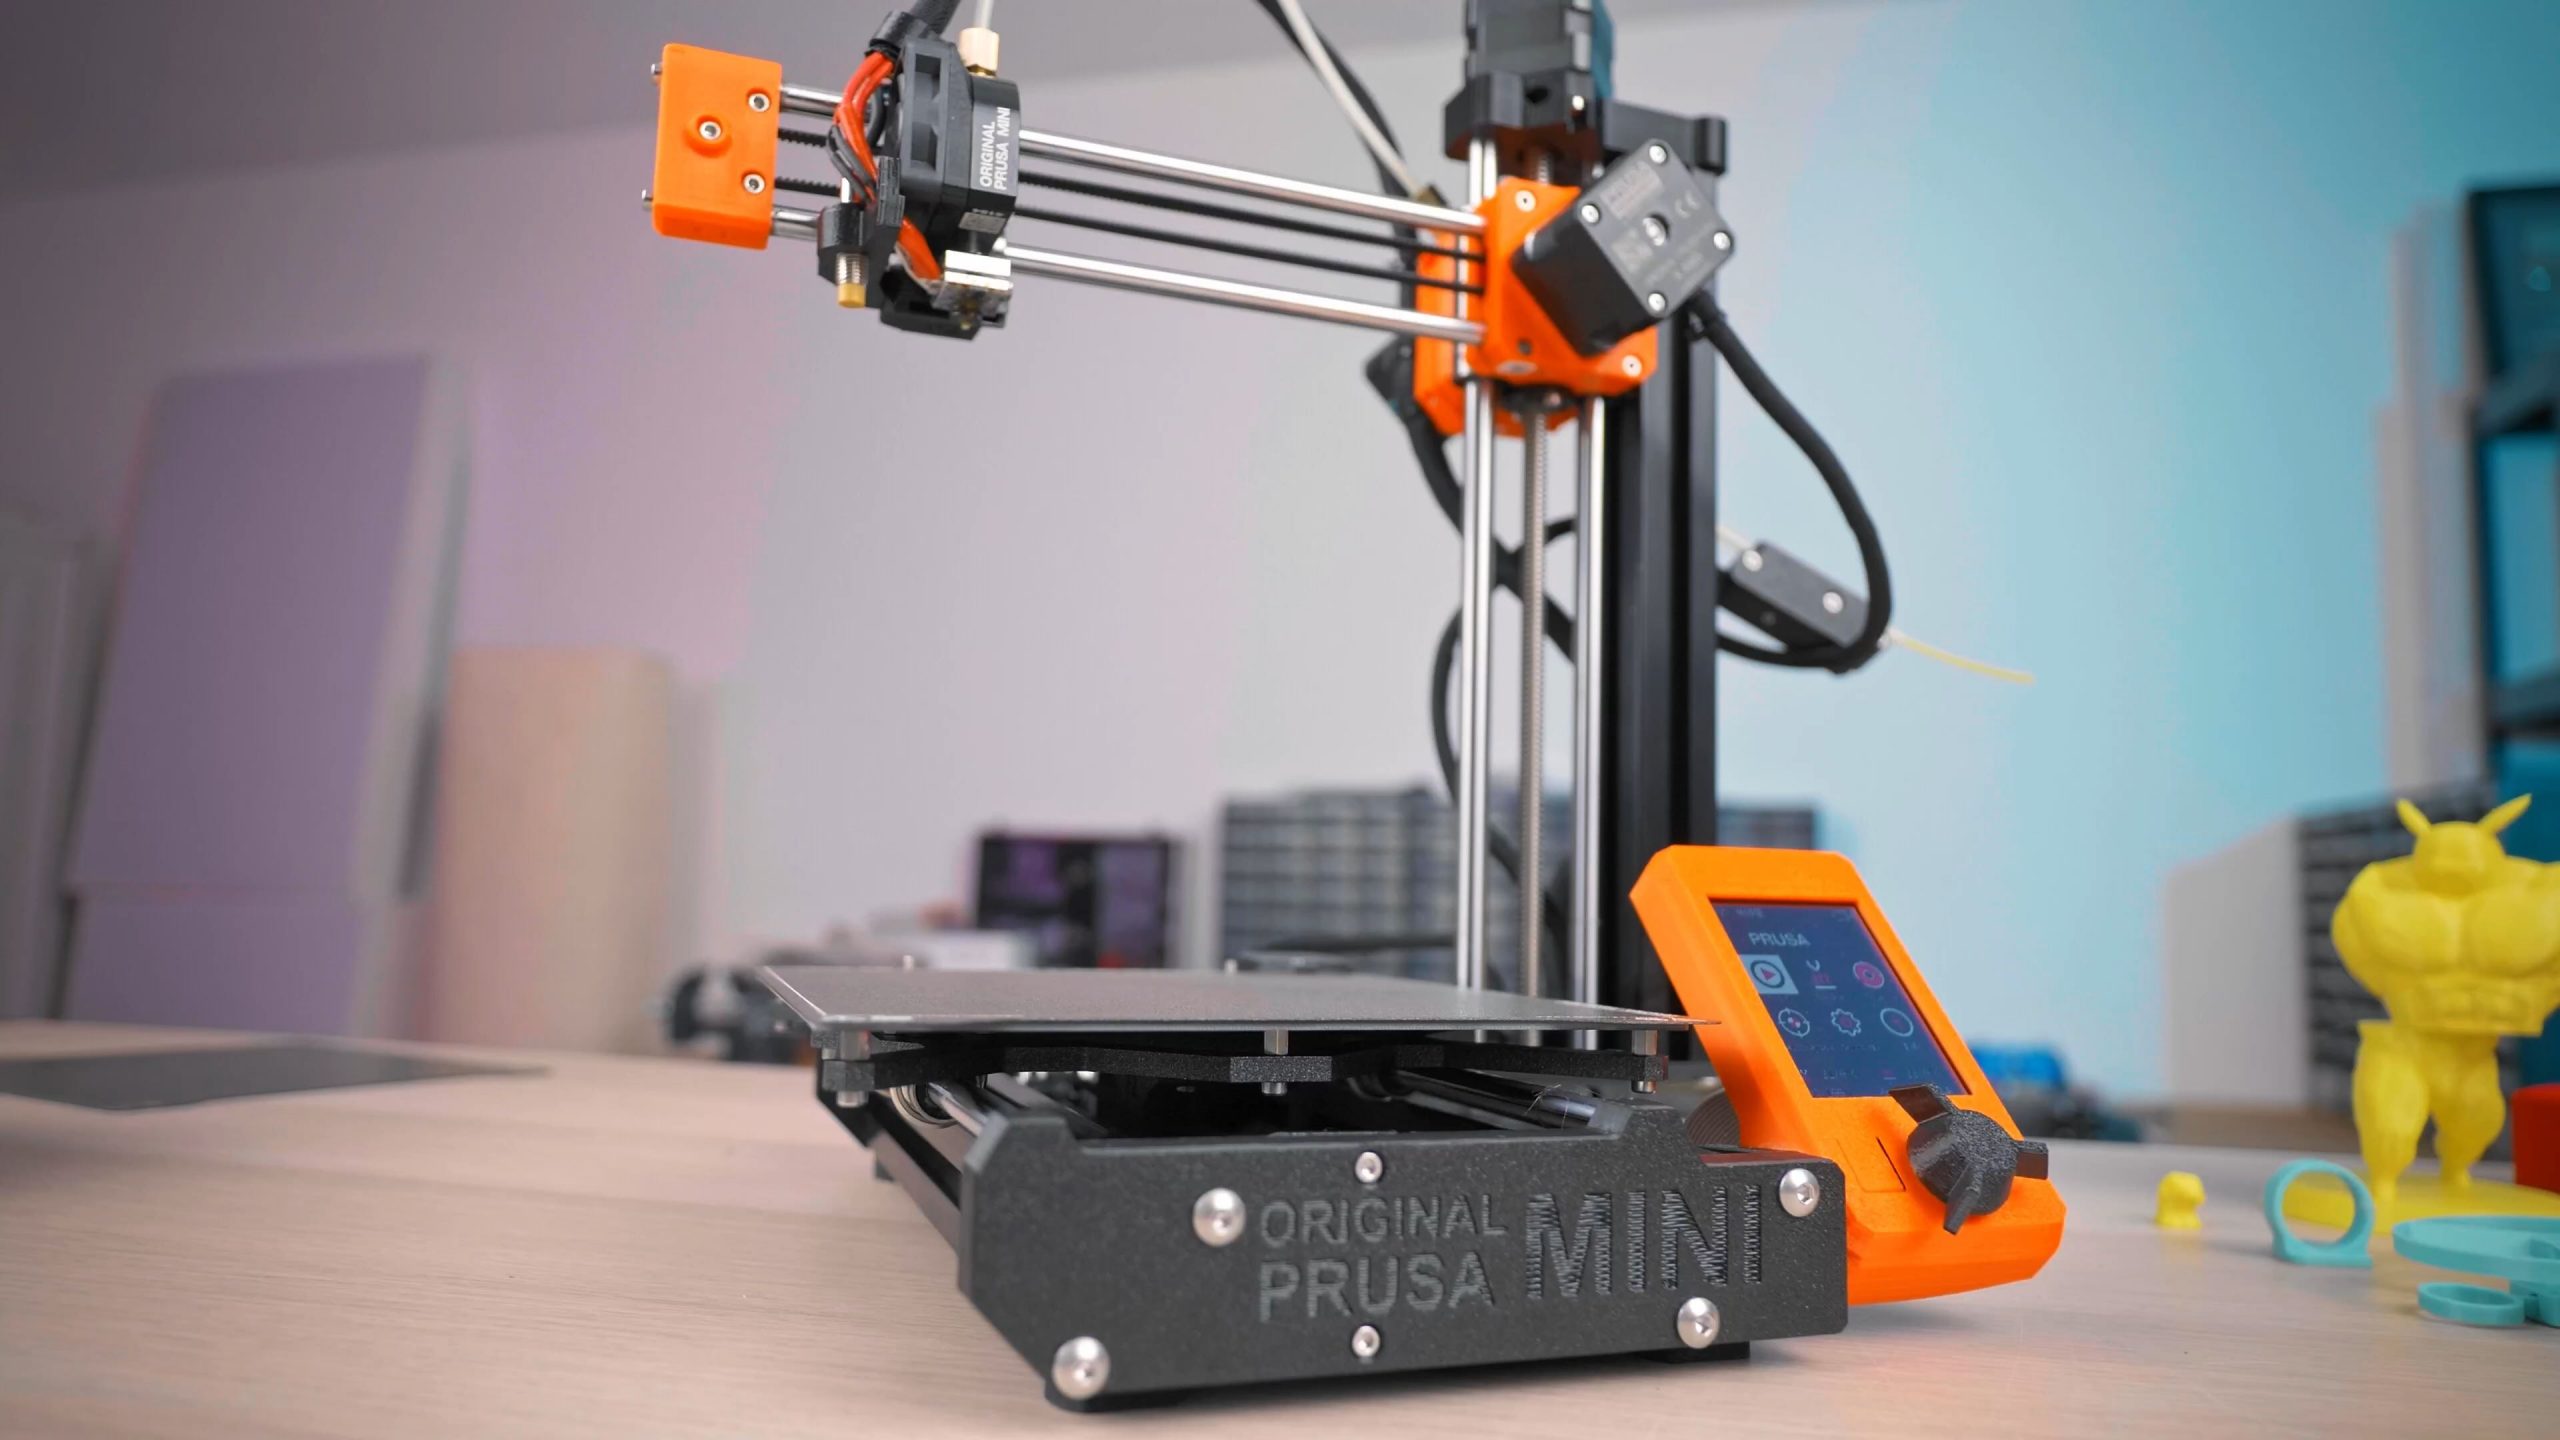 resultat på vegne af Roux The next “BIG” thing: Prusa Mini Review – Tom's 3D printing guides and  reviews